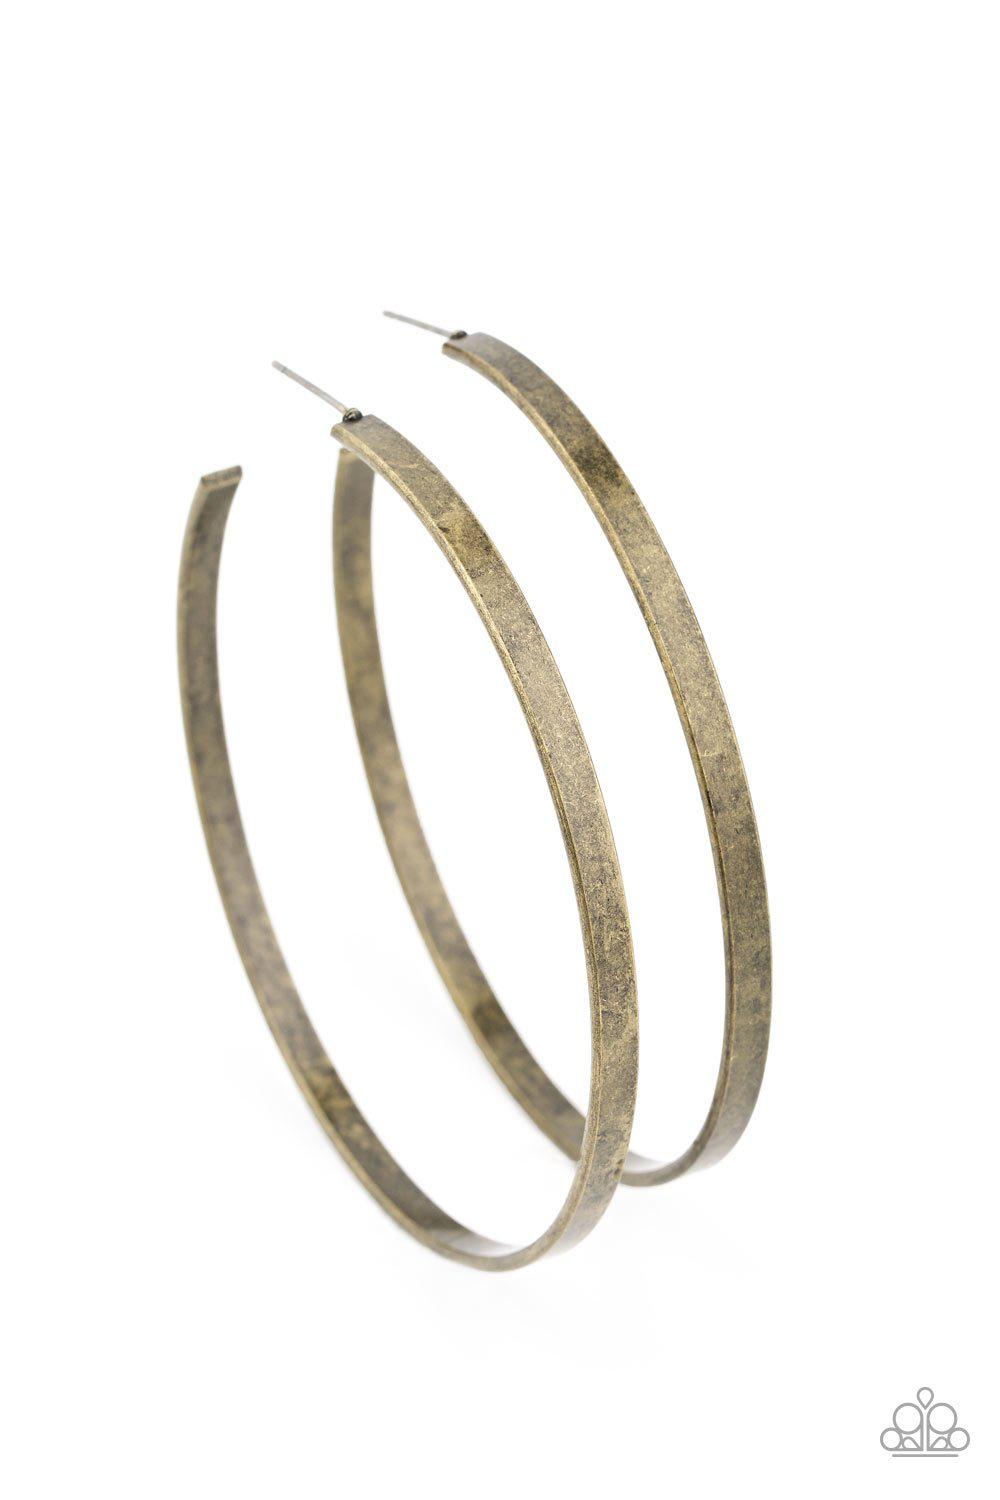 Lean Into The Curves Brass Hoop Earrings - Paparazzi Accessories - lightbox -CarasShop.com - $5 Jewelry by Cara Jewels